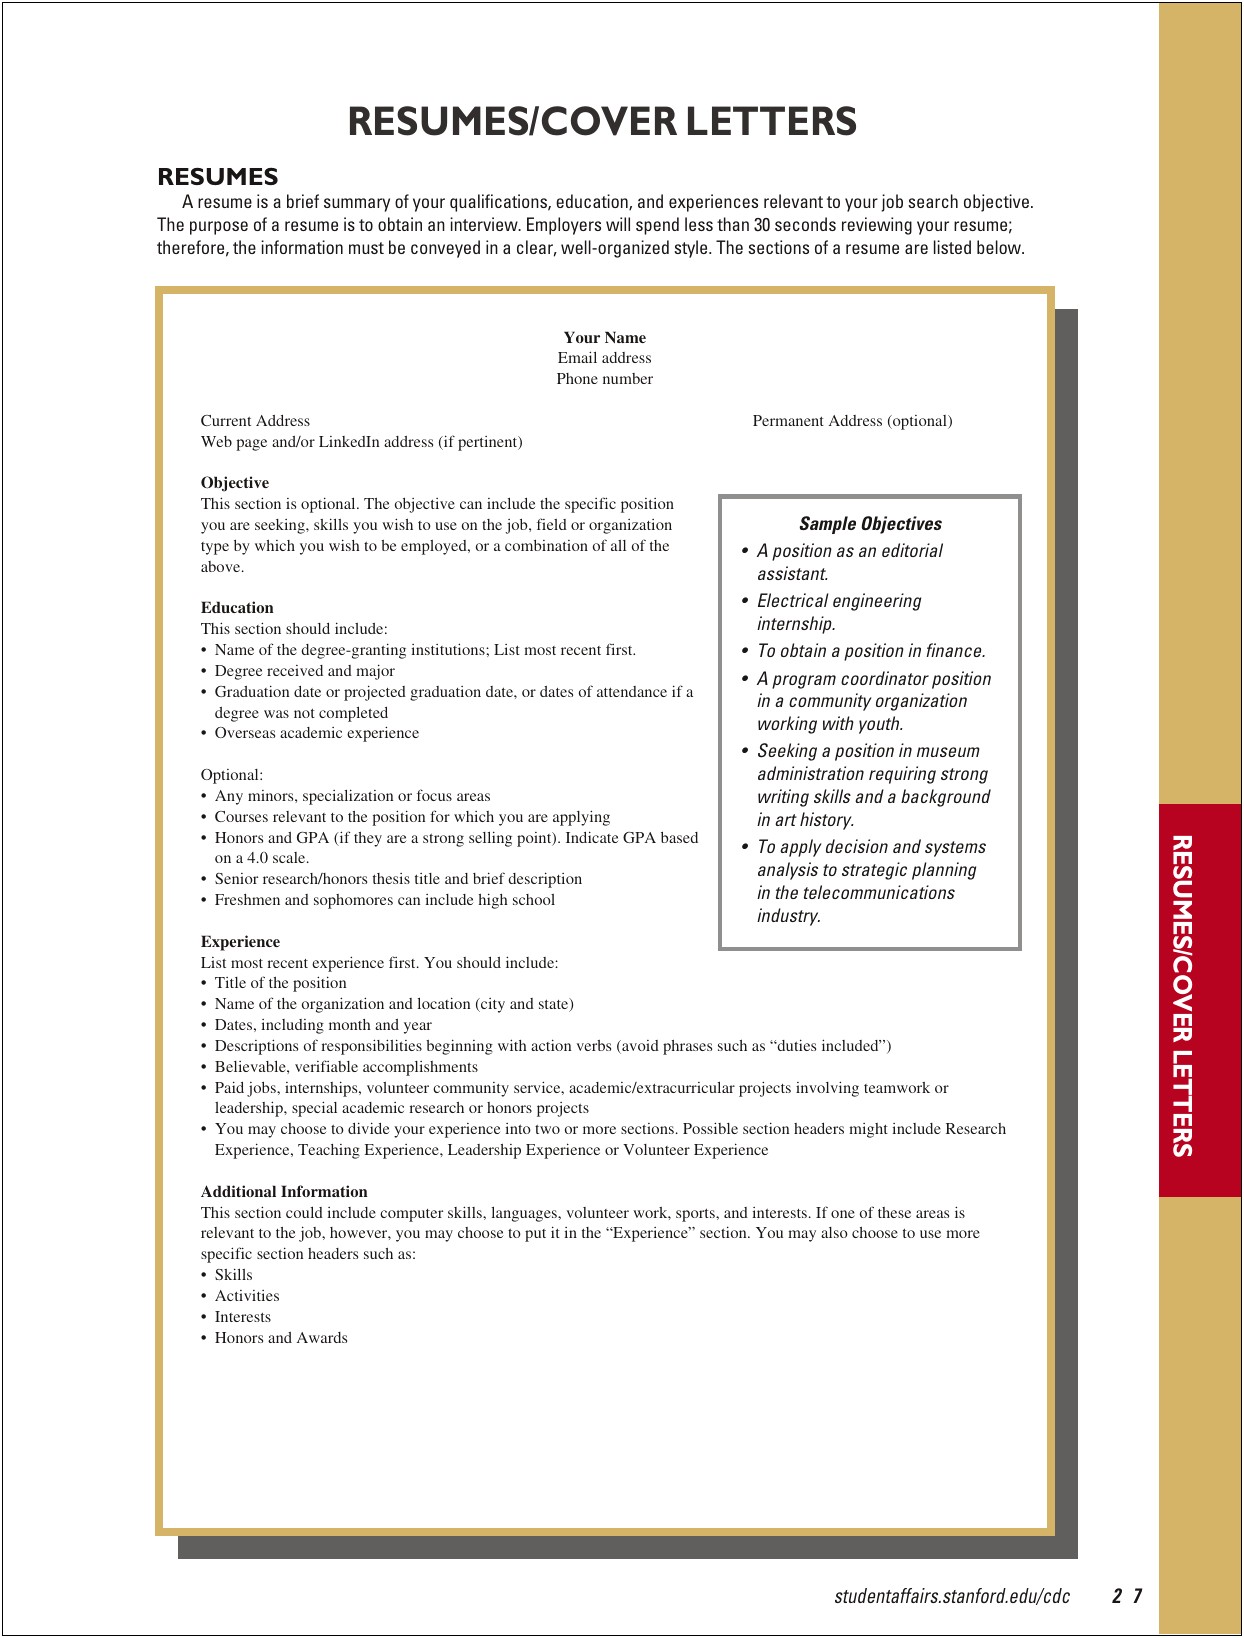 Examples For Awards On A Resume